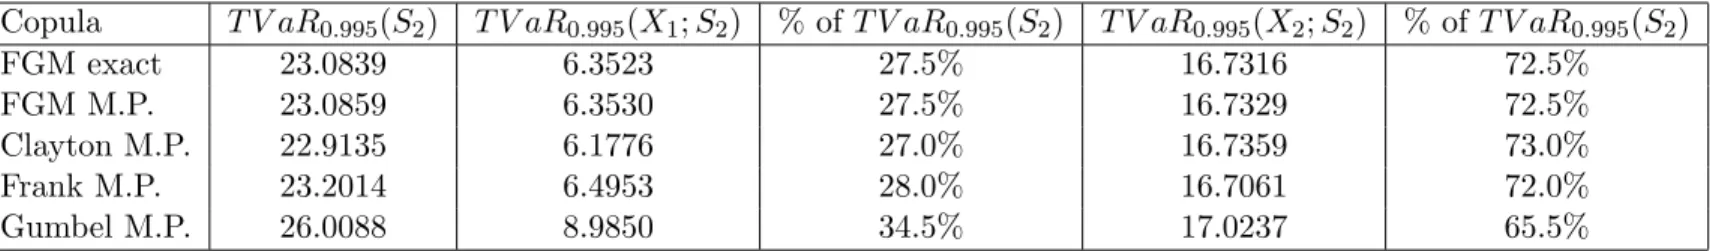 Table 5: TVaR and TVaR-based allocation for S 2 with κ = 0.995.